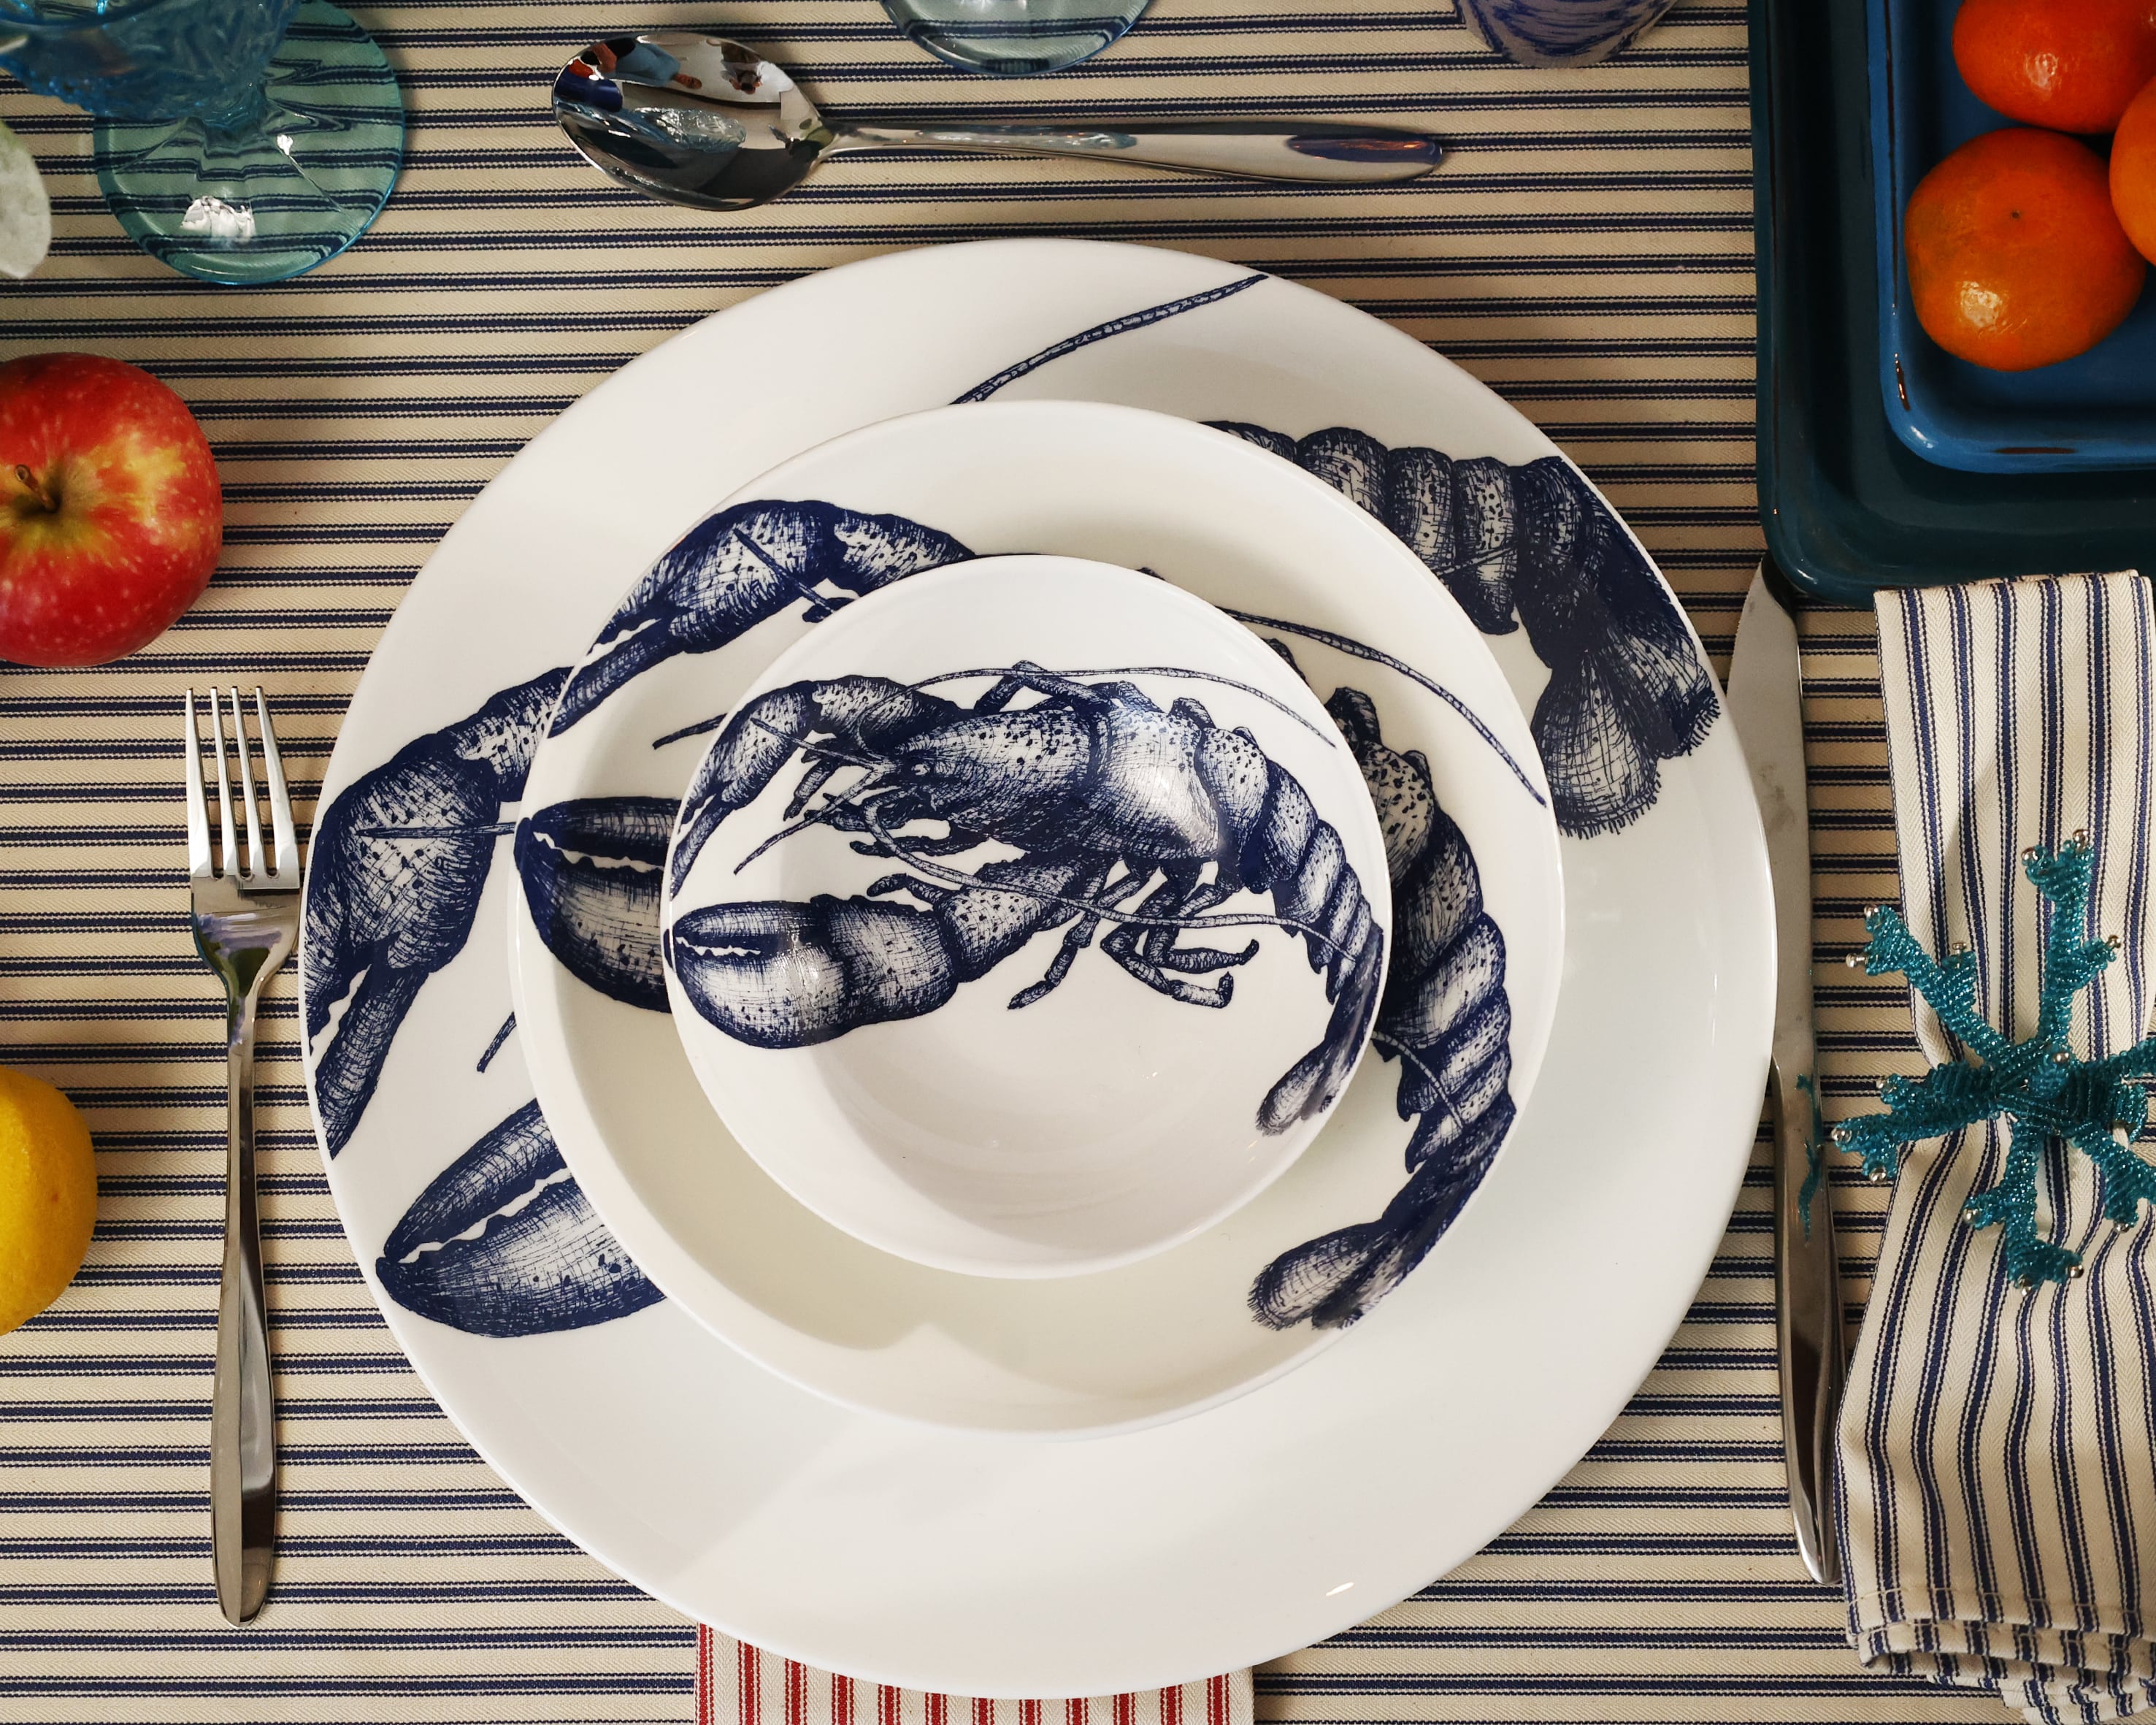 Aerial view of Bone China White plate with hand drawn illustrations of our Classic Lobster in Navy stacked with the dinner plate,side plate and a bowl.Set in place setting with cutlery on a navy stripe tablecloth